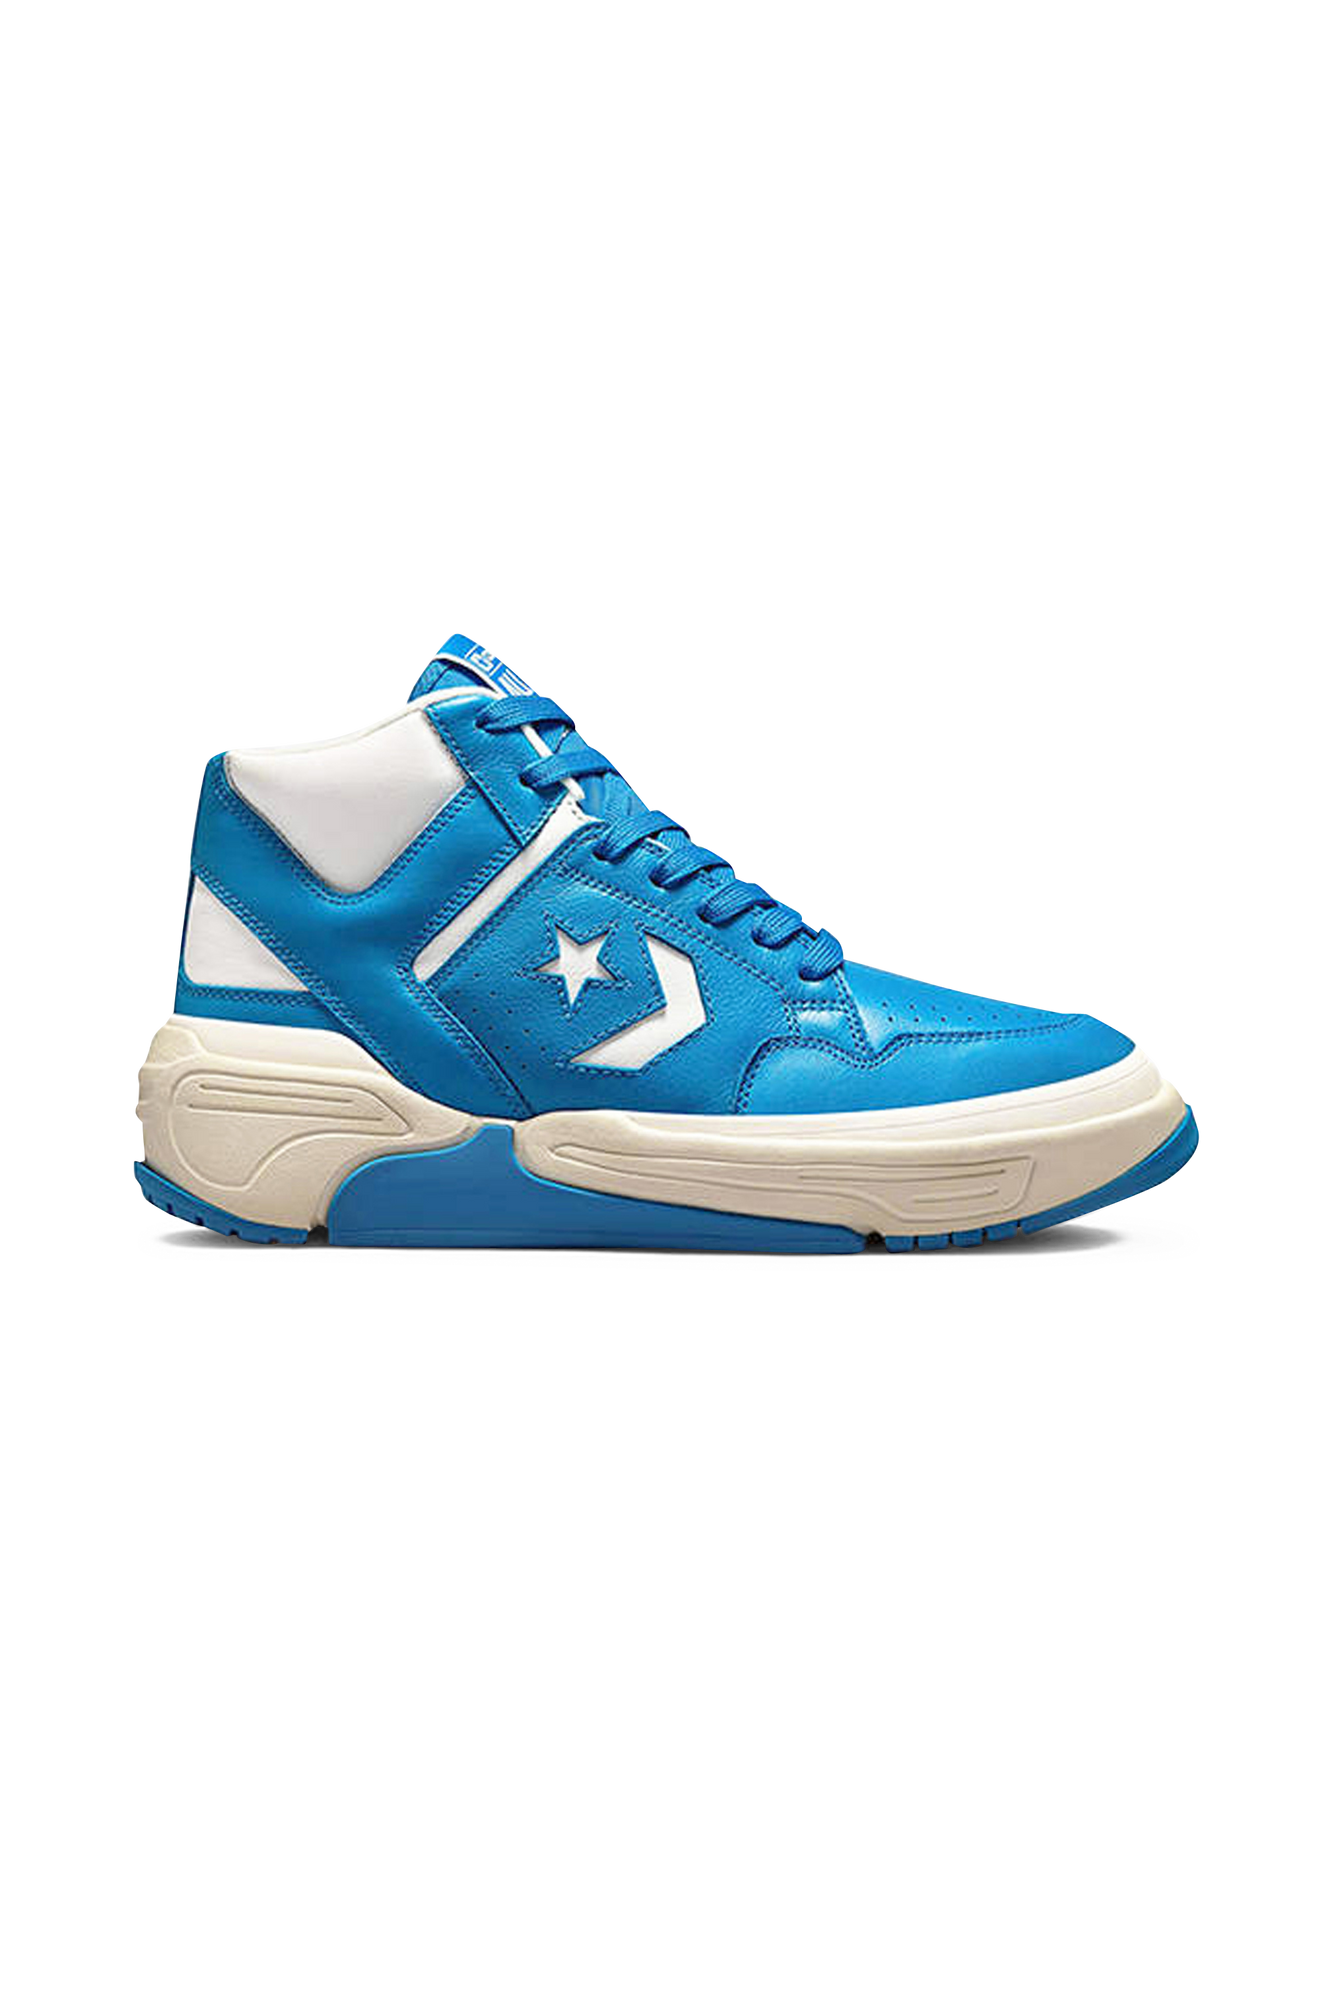 Converse - Converse Weapon CX - Taille 41